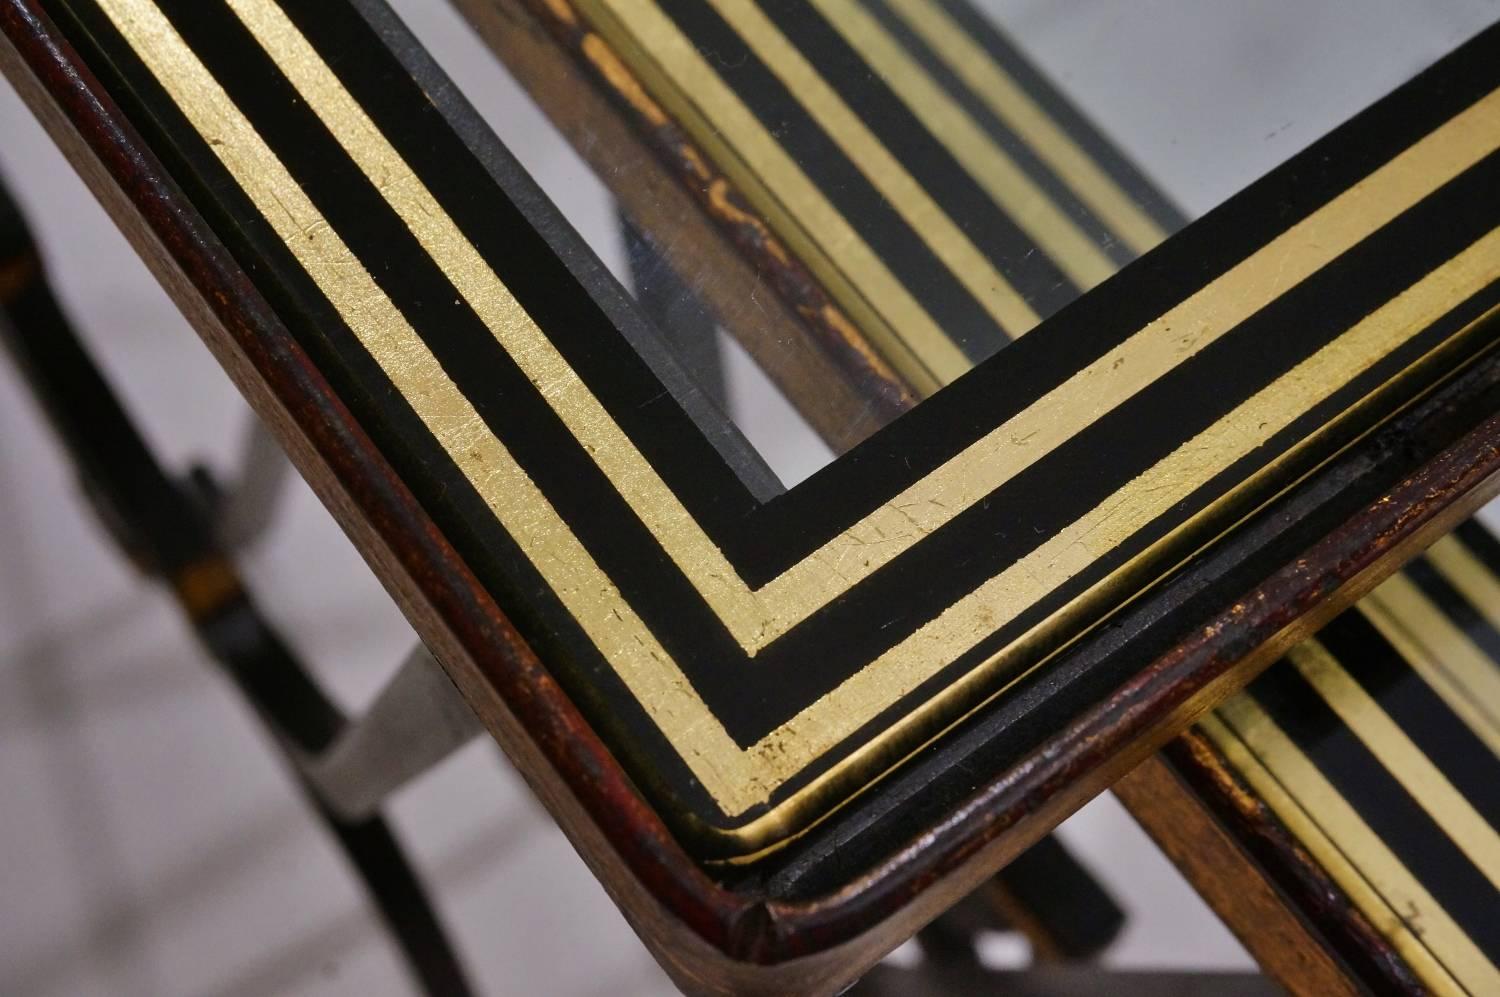 Rene Drouet Nesting Tables, Gilt Iron and Gold Leaf Glass Tops, French 3